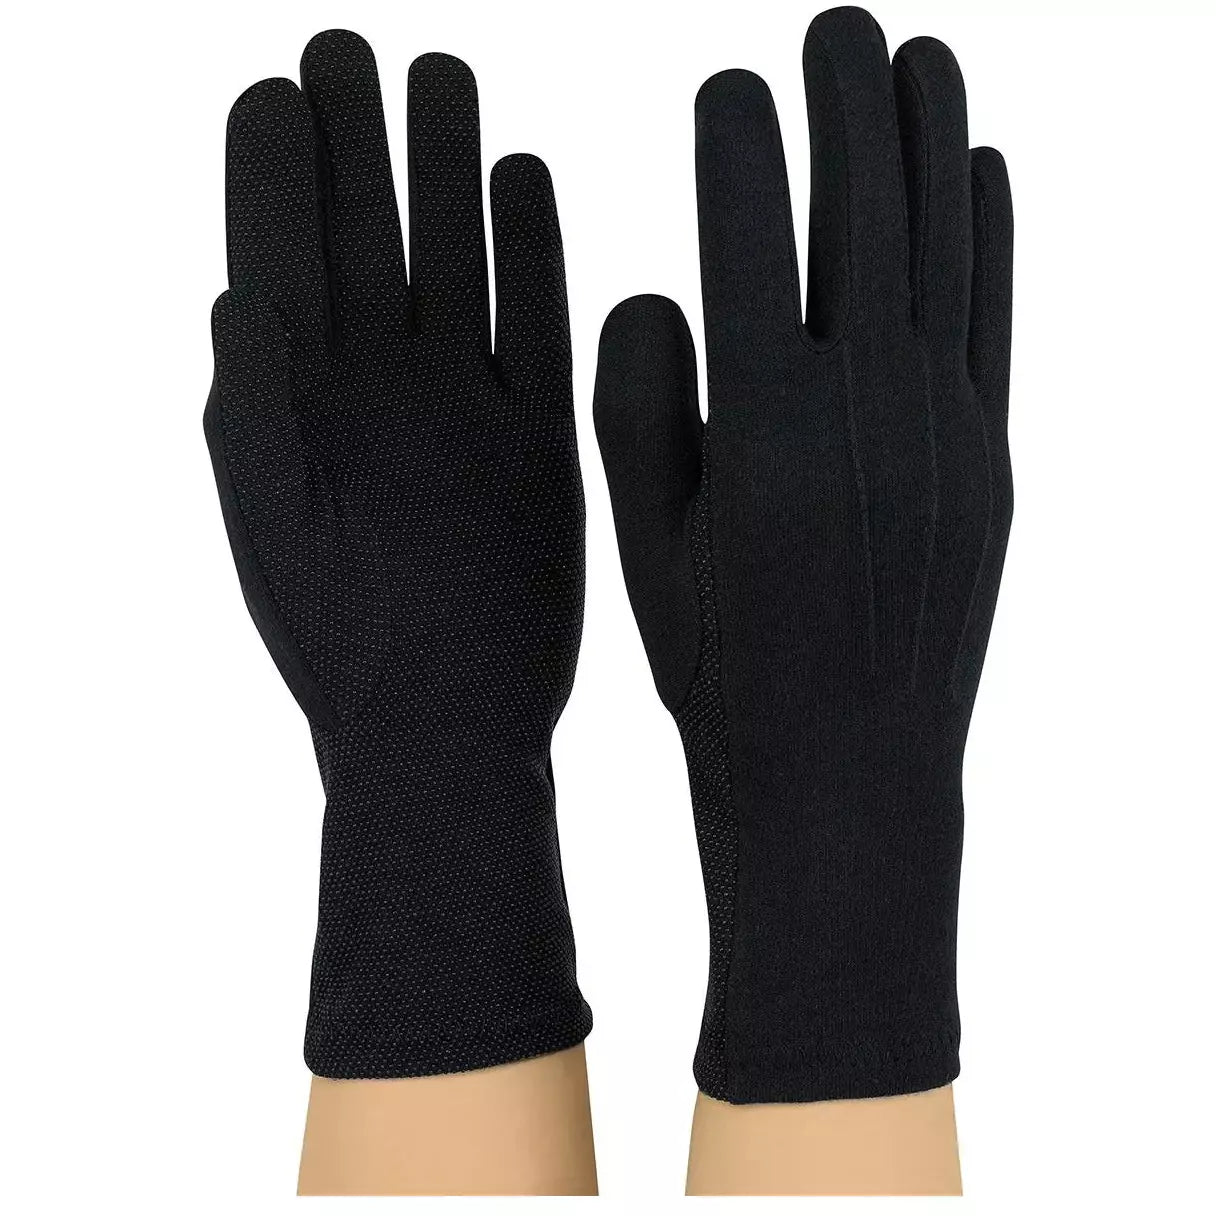 Long Wristed Sure Grip Glove